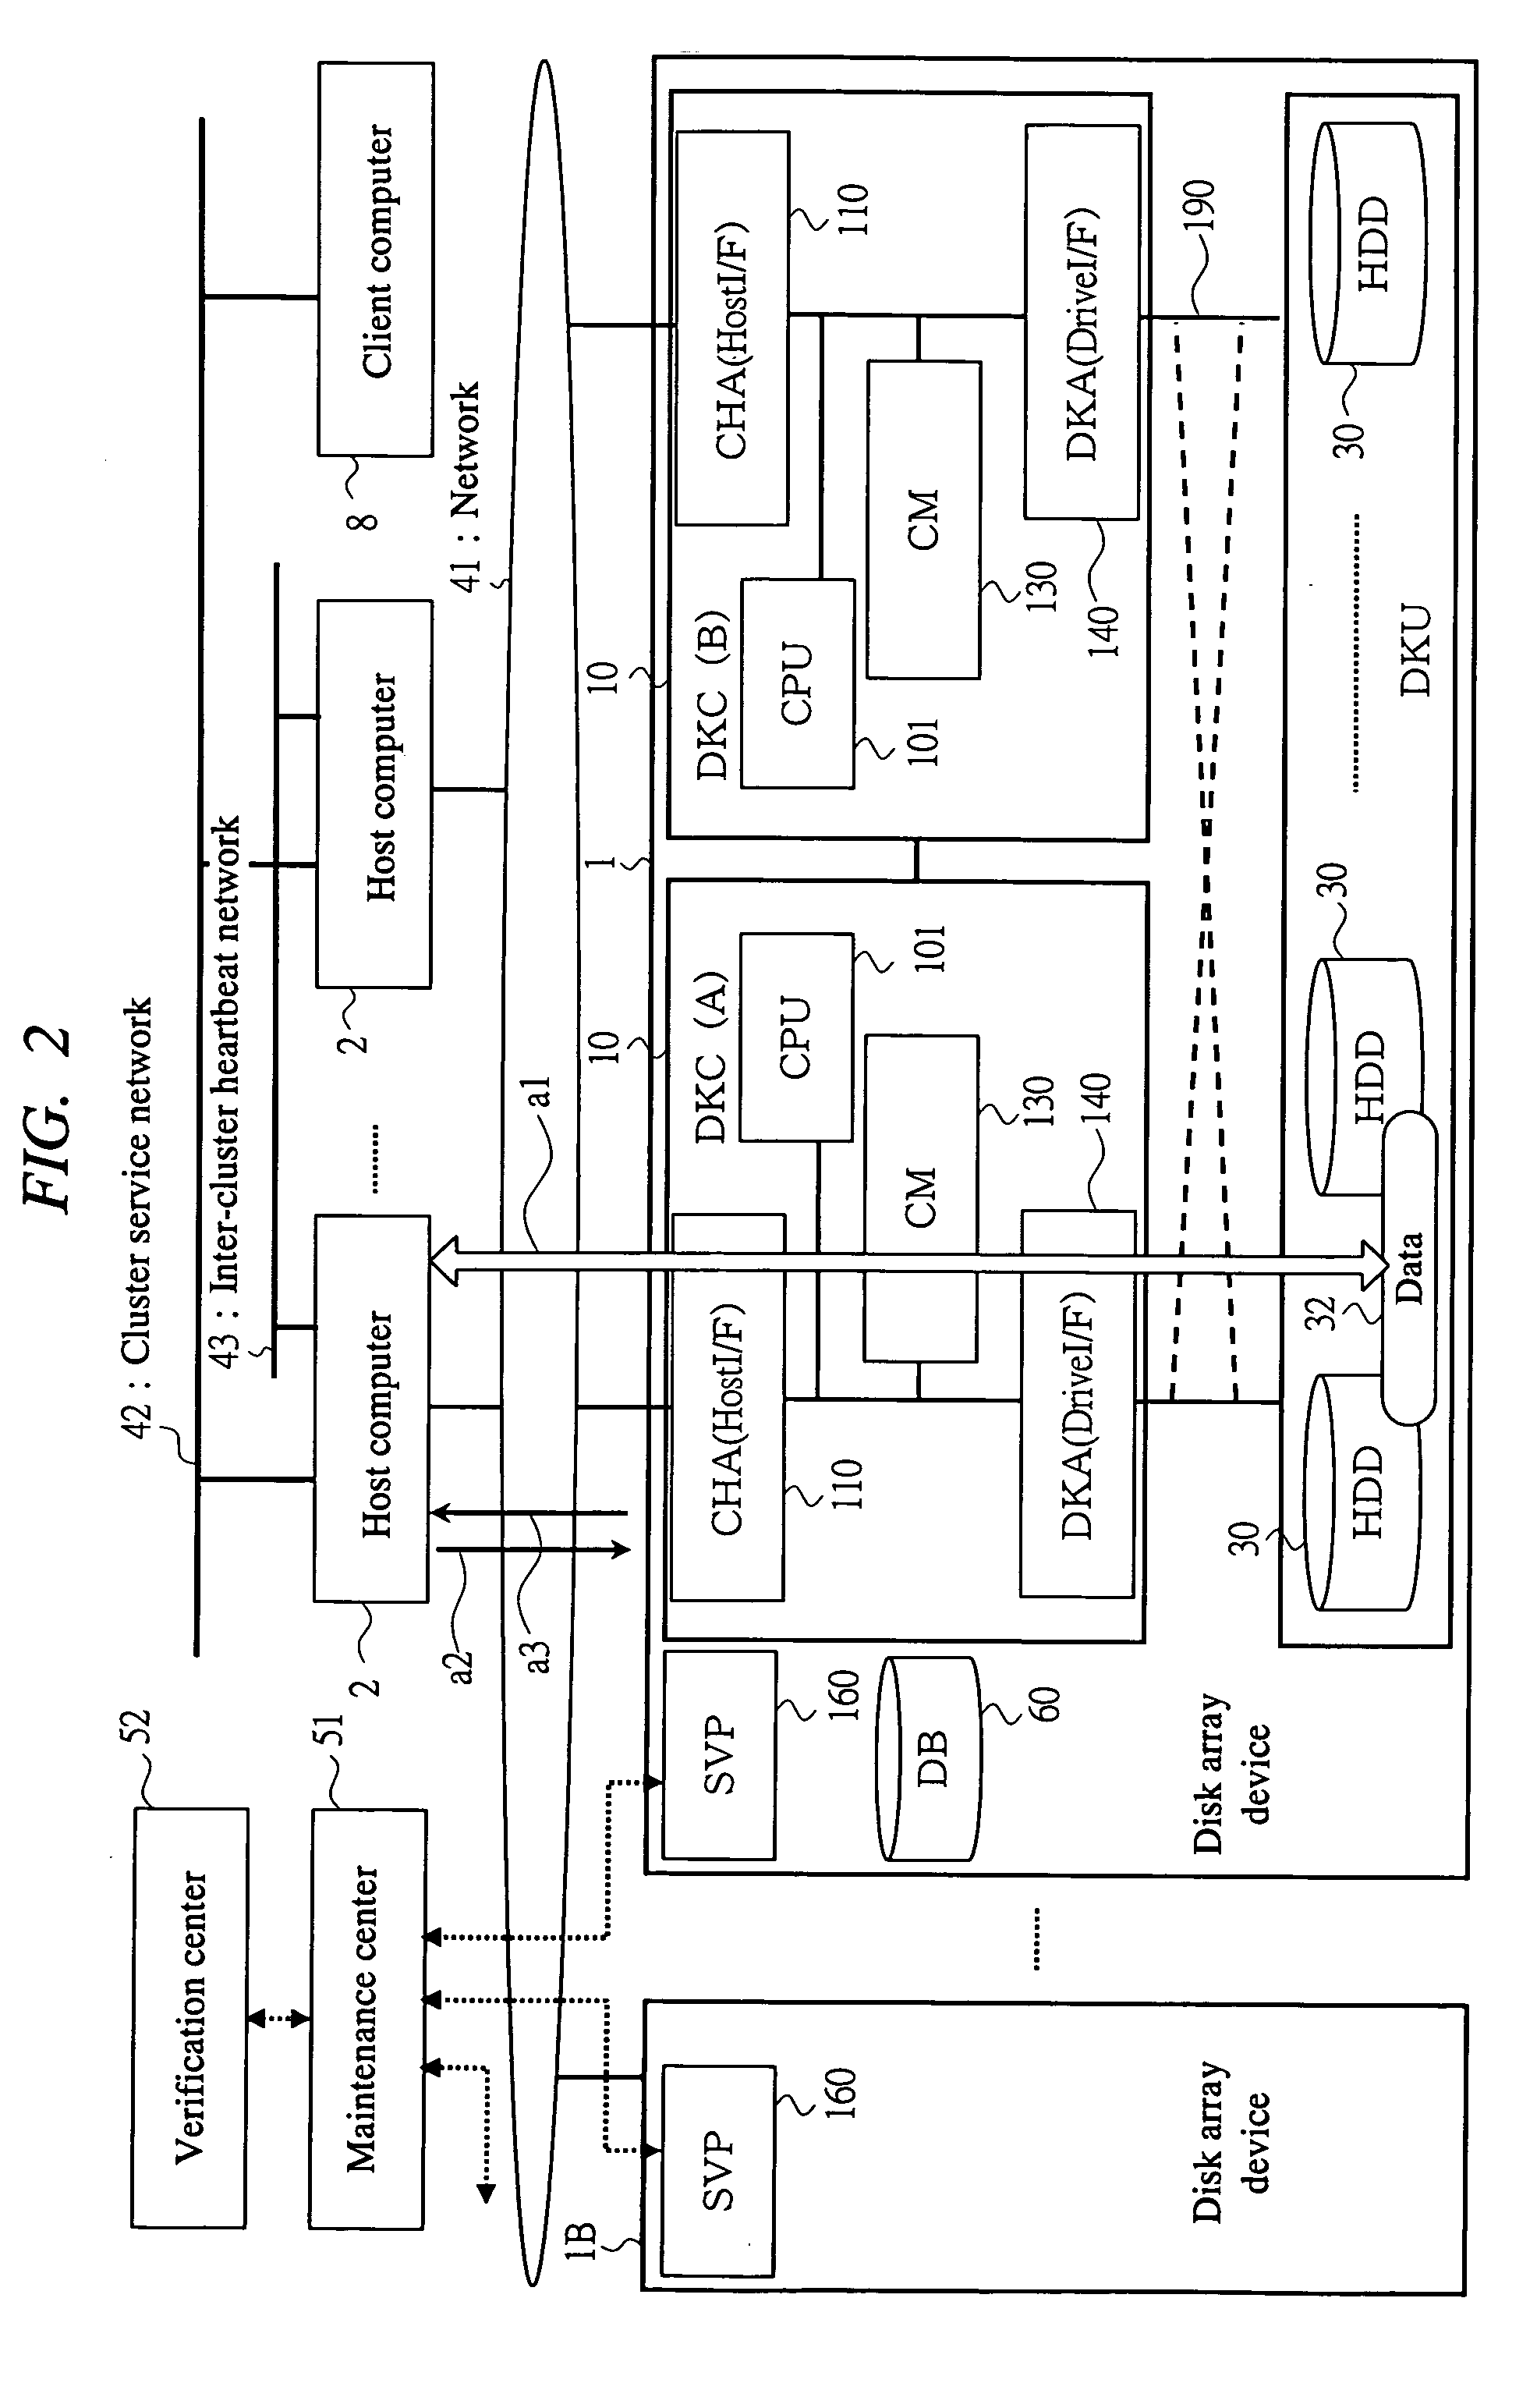 Disk array device